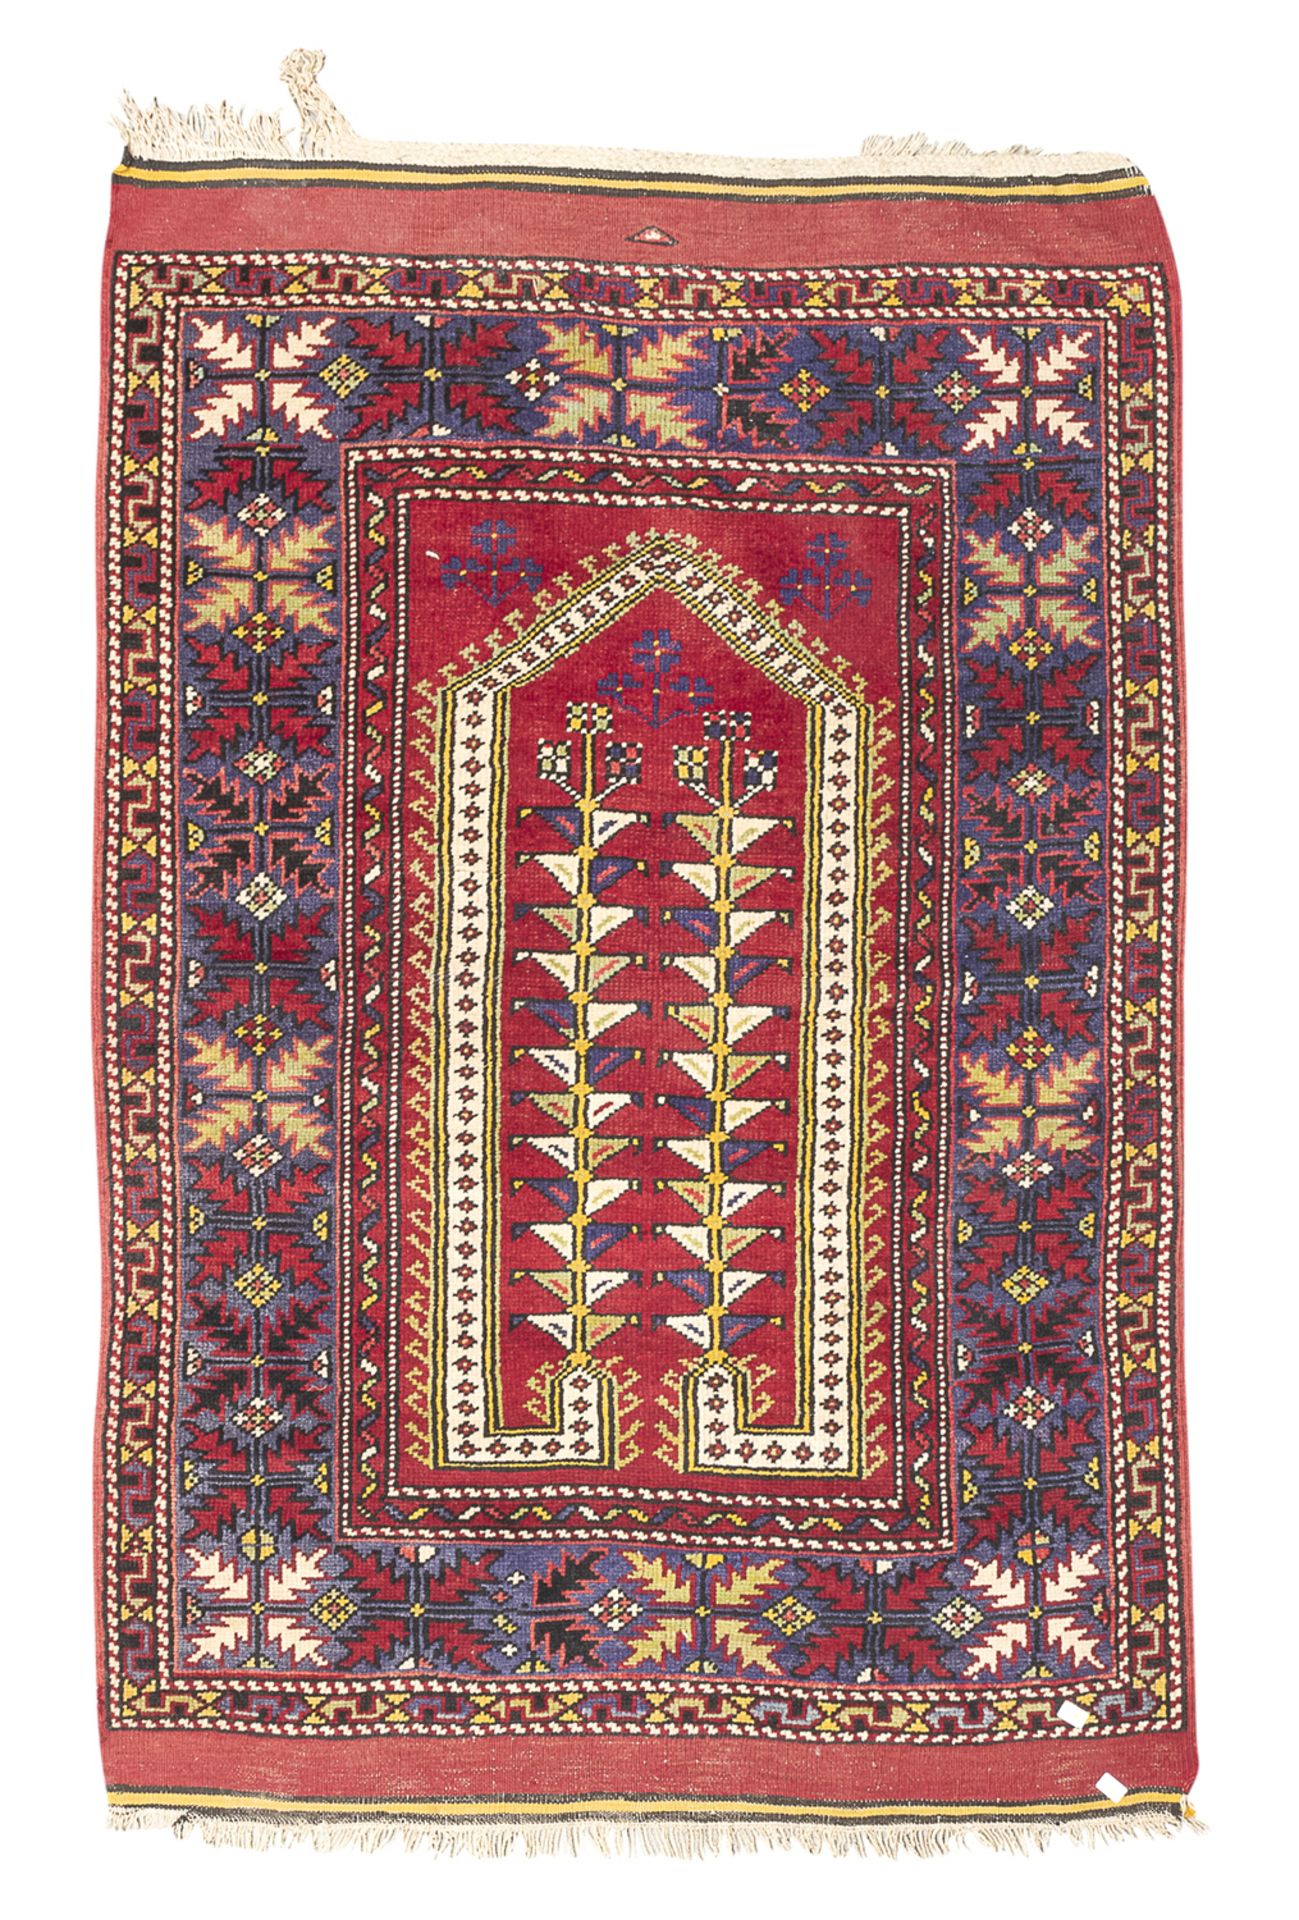 BELUCISTAN NOMADE RUG EARLY 20TH CENTURY